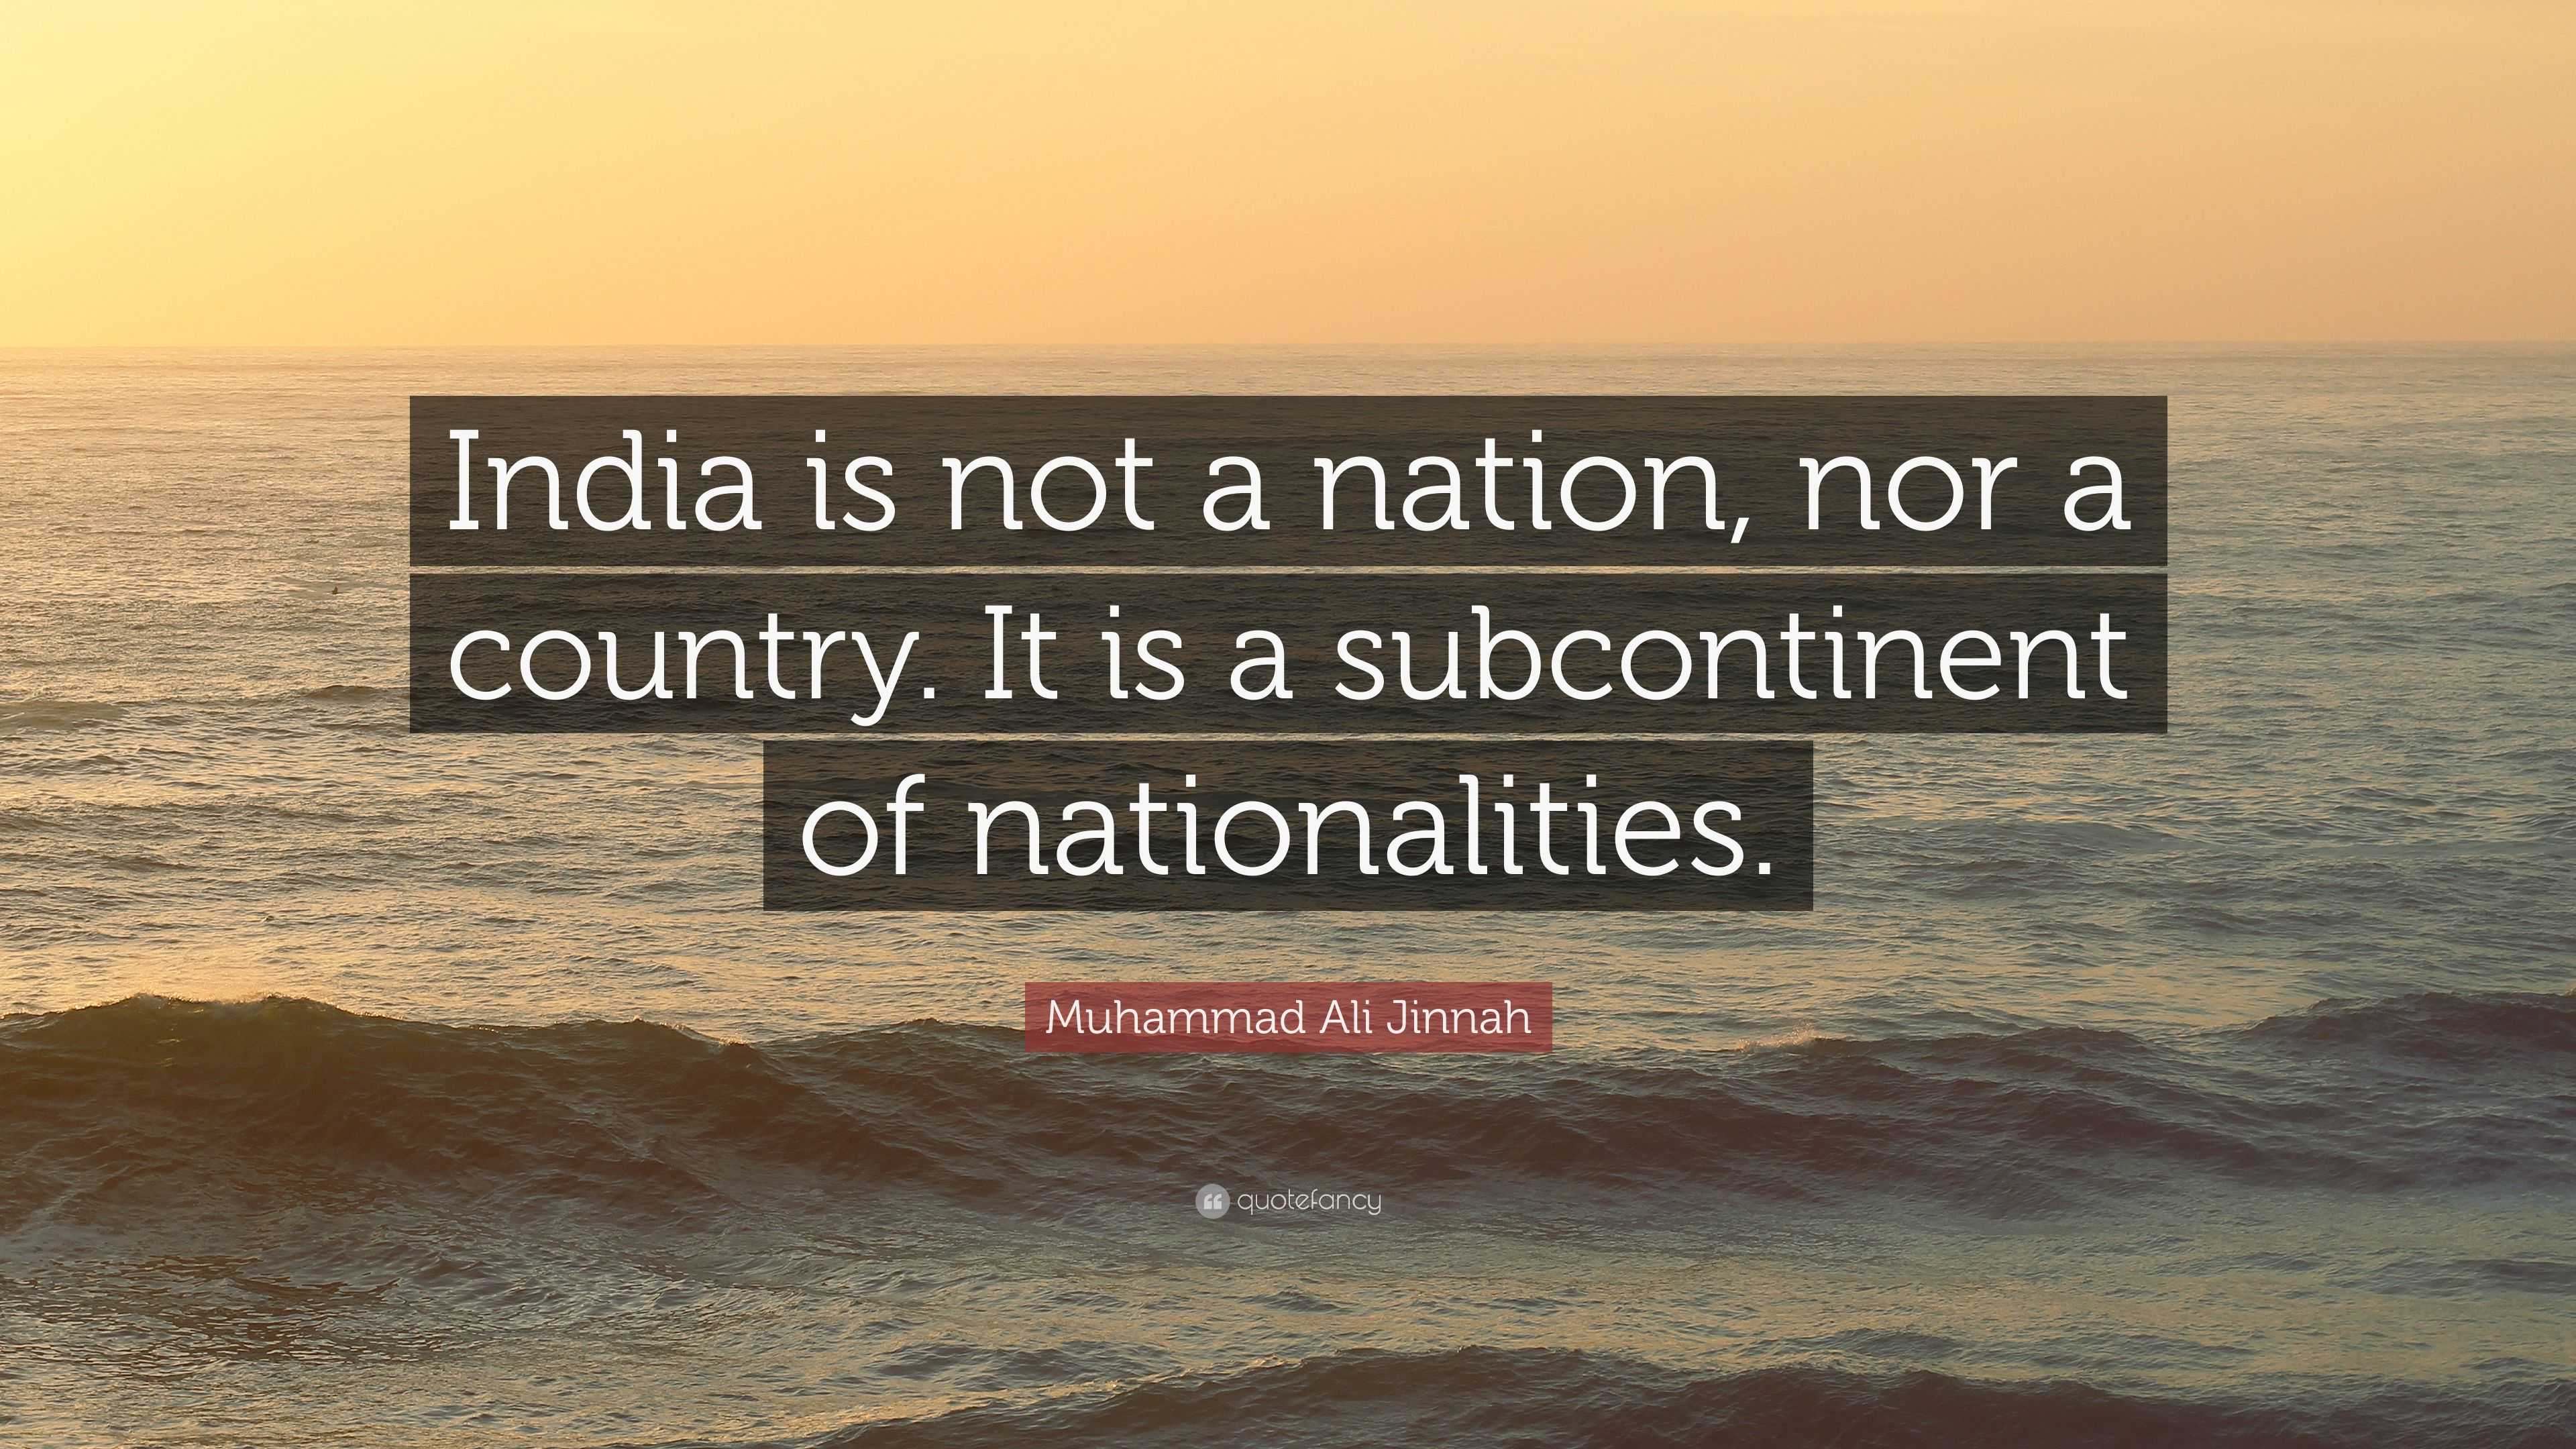 Muhammad Ali Jinnah Quote: "India is not a nation, nor a ...